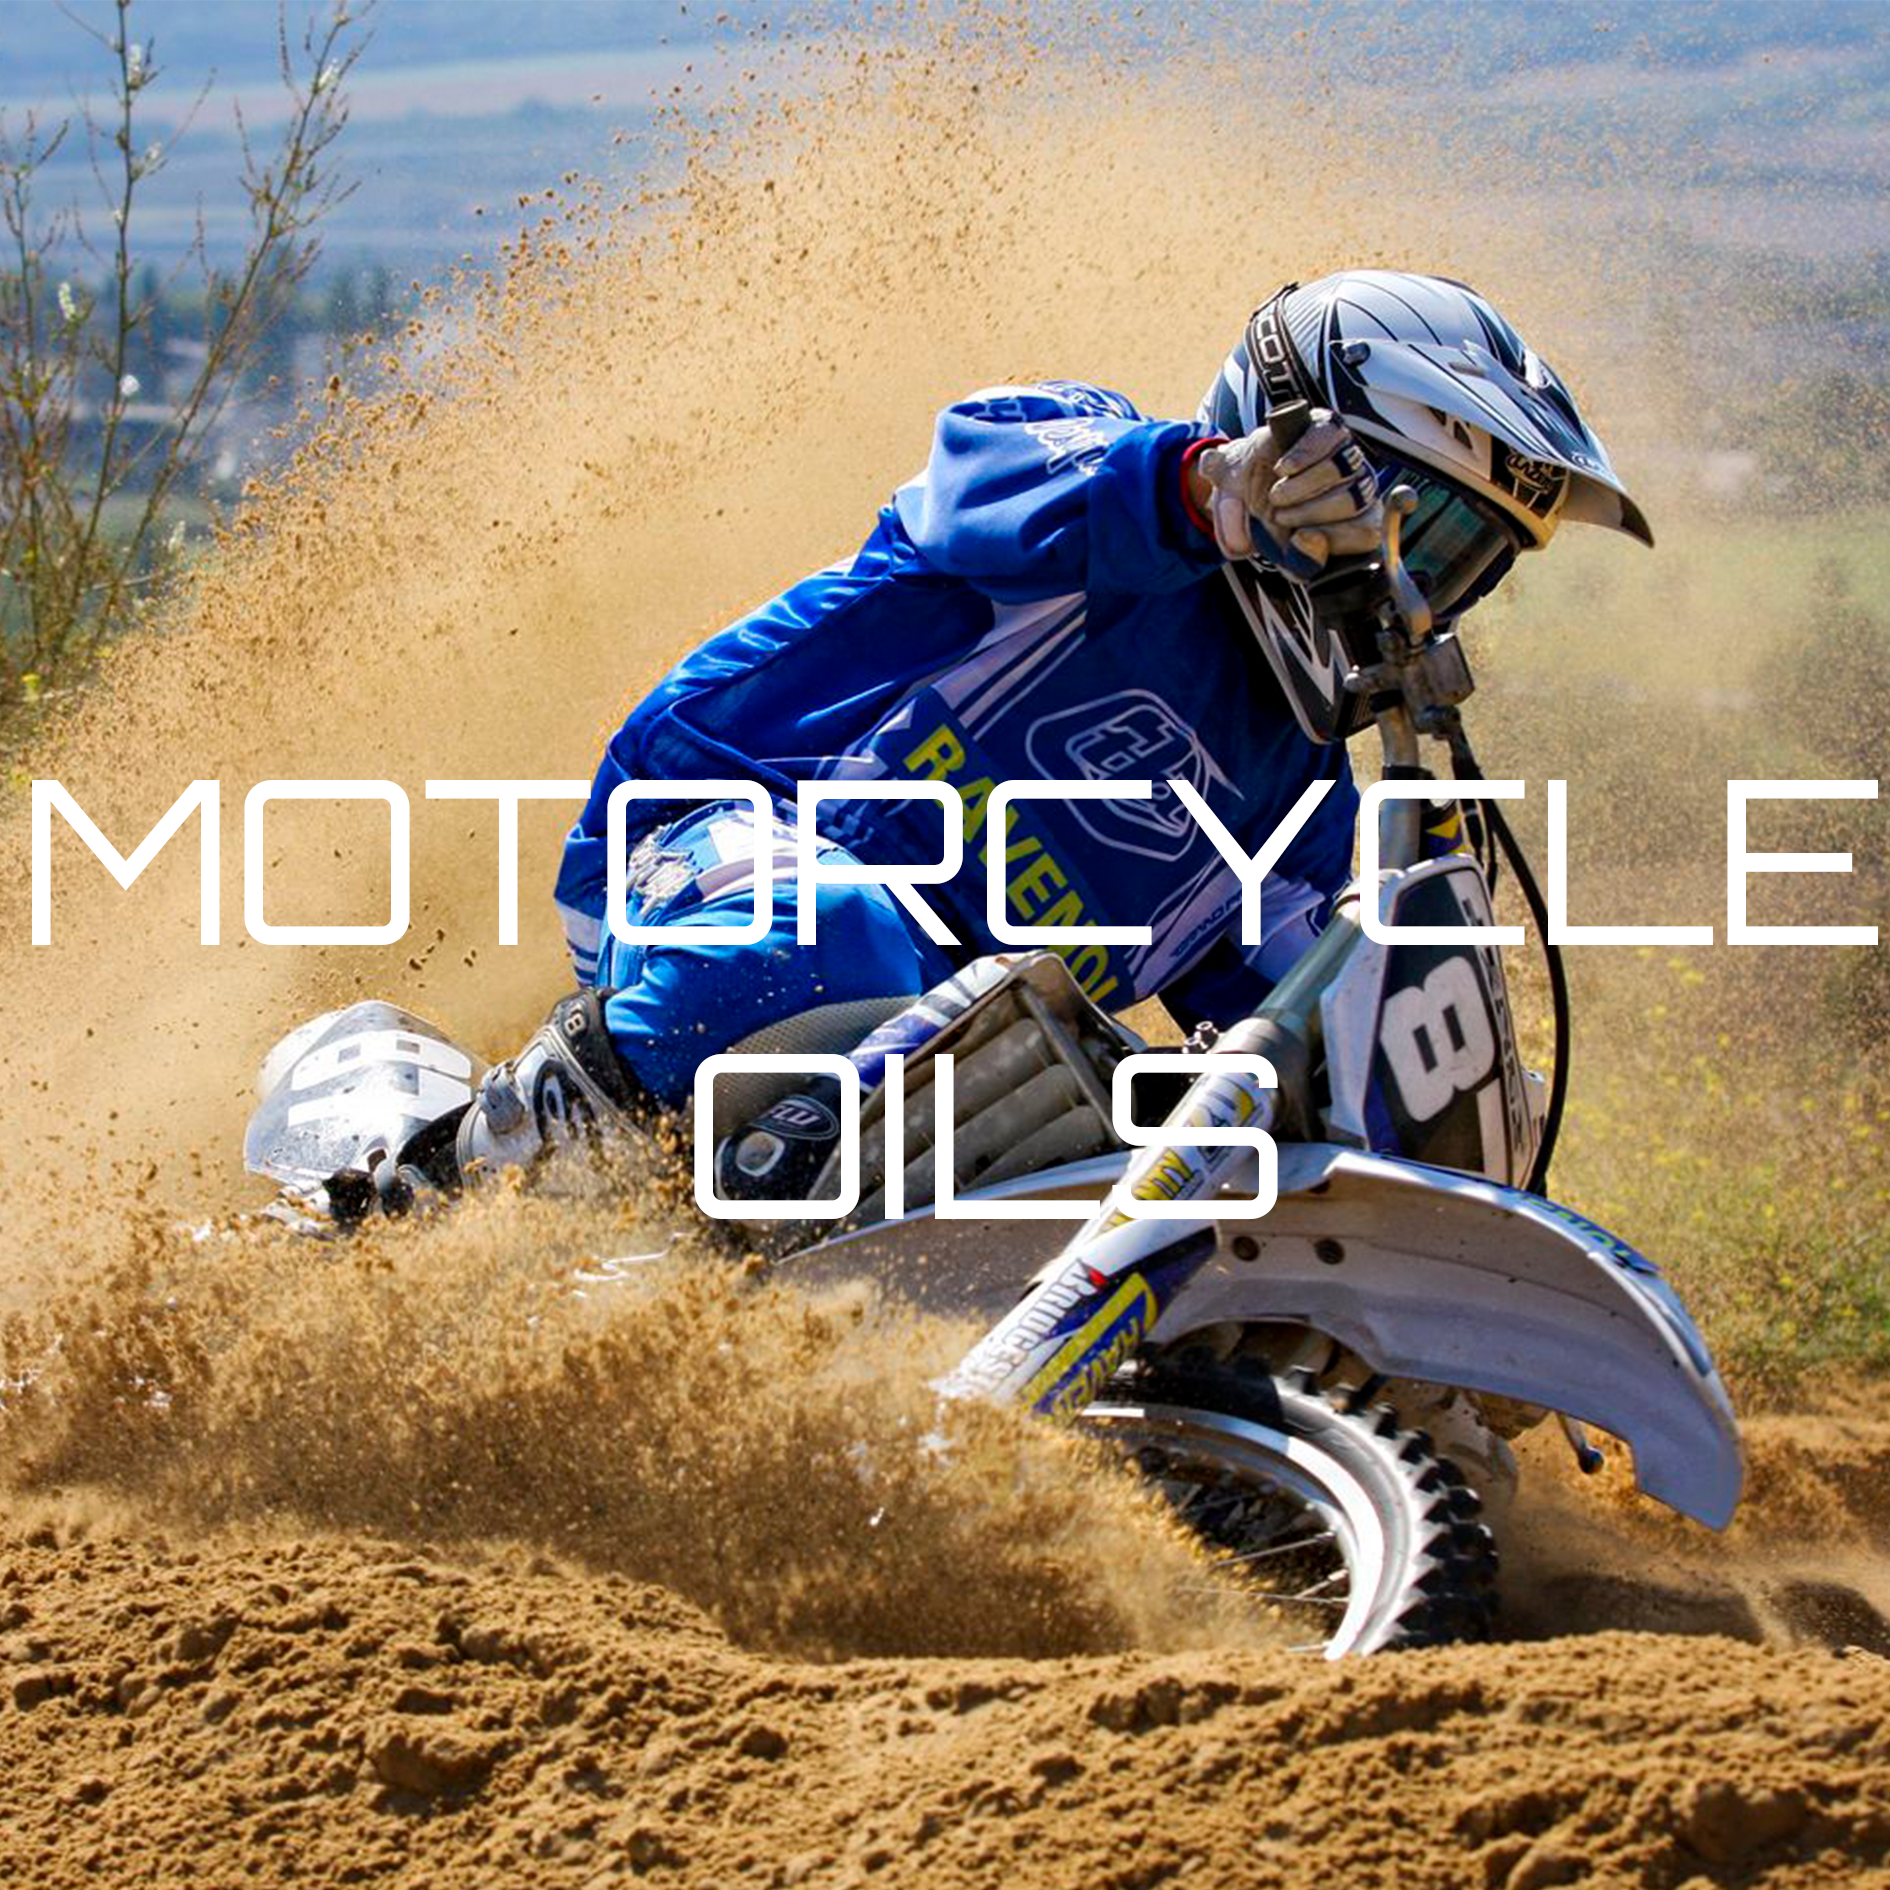 Motorcycle Oils